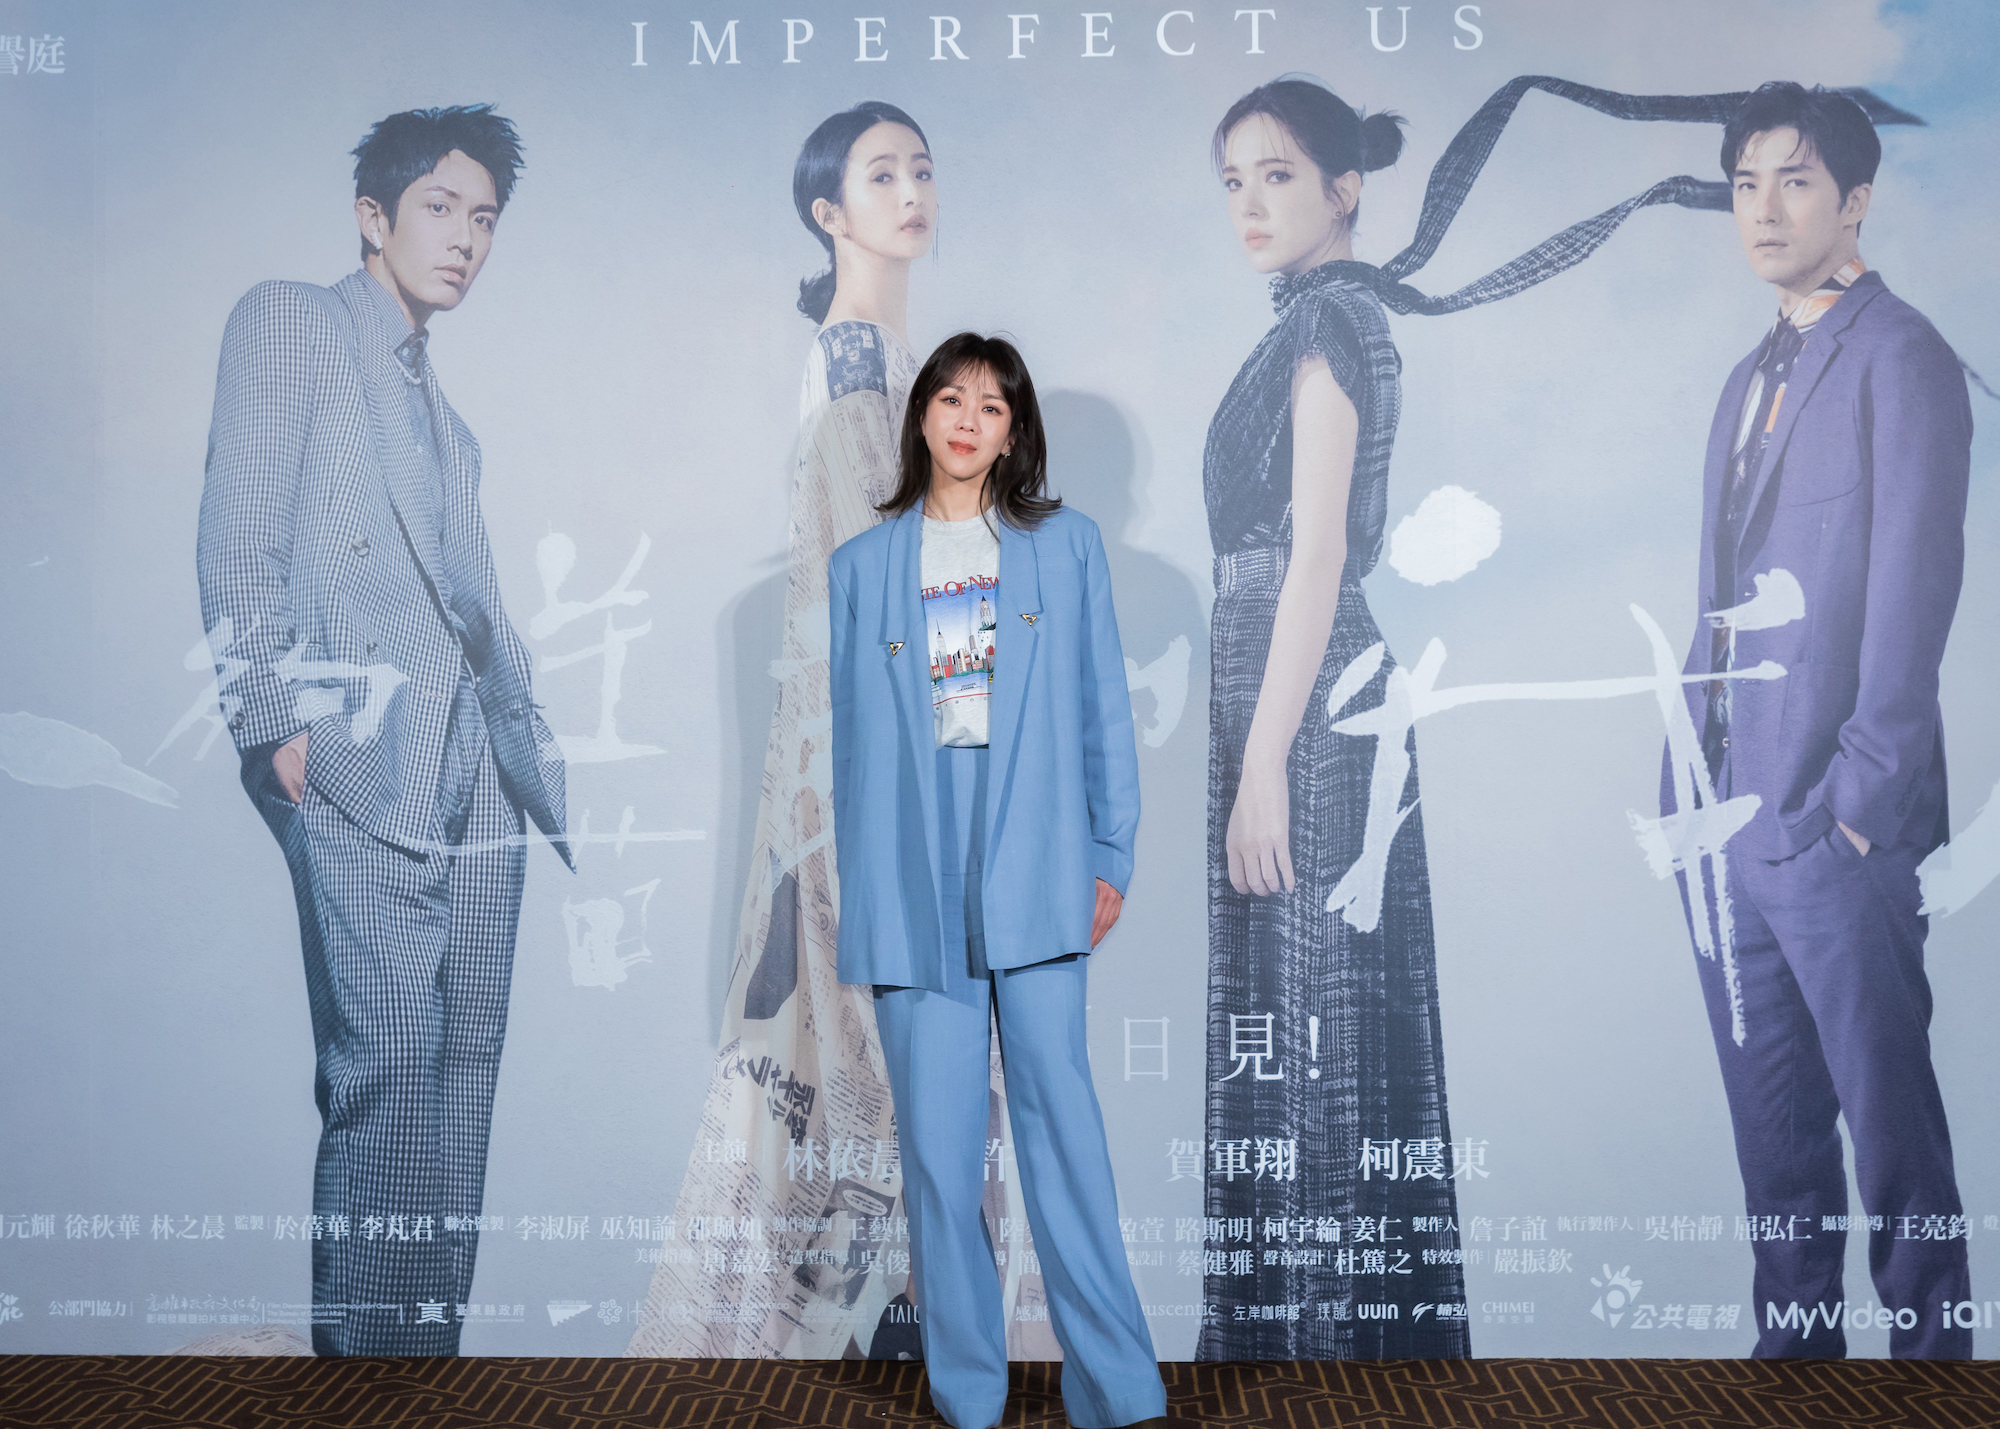 'I should spend more time creating my own stories': Tanya Chua, Ariel Lin, Tiffany Hsu on times they got envious of others' online lives